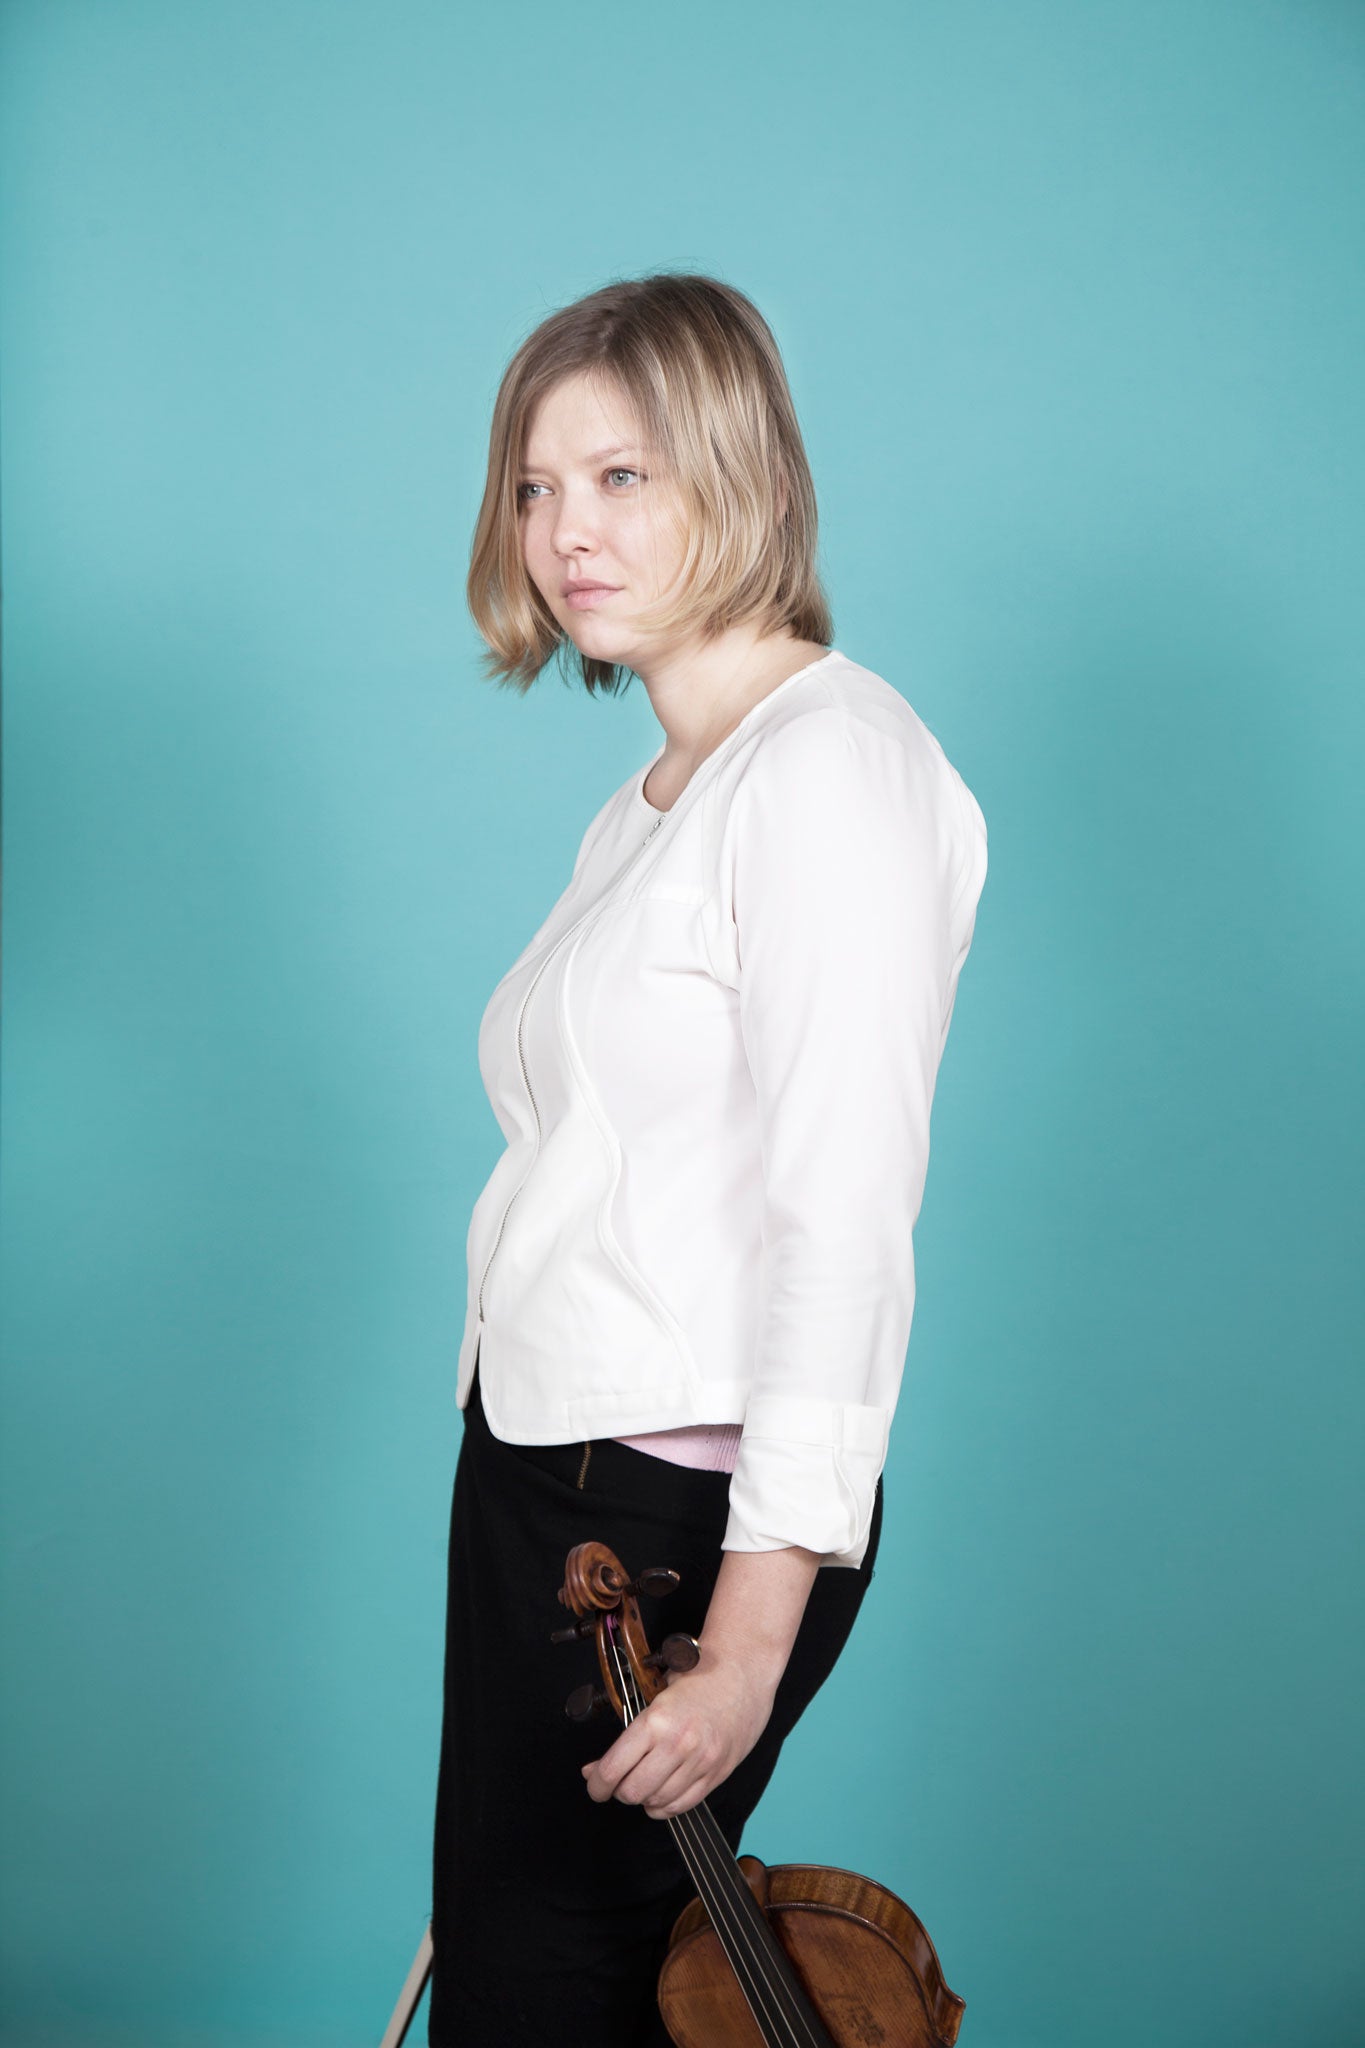 Alina Ibragimova: 'It's a journey that never ends - both as a listener and as a player'